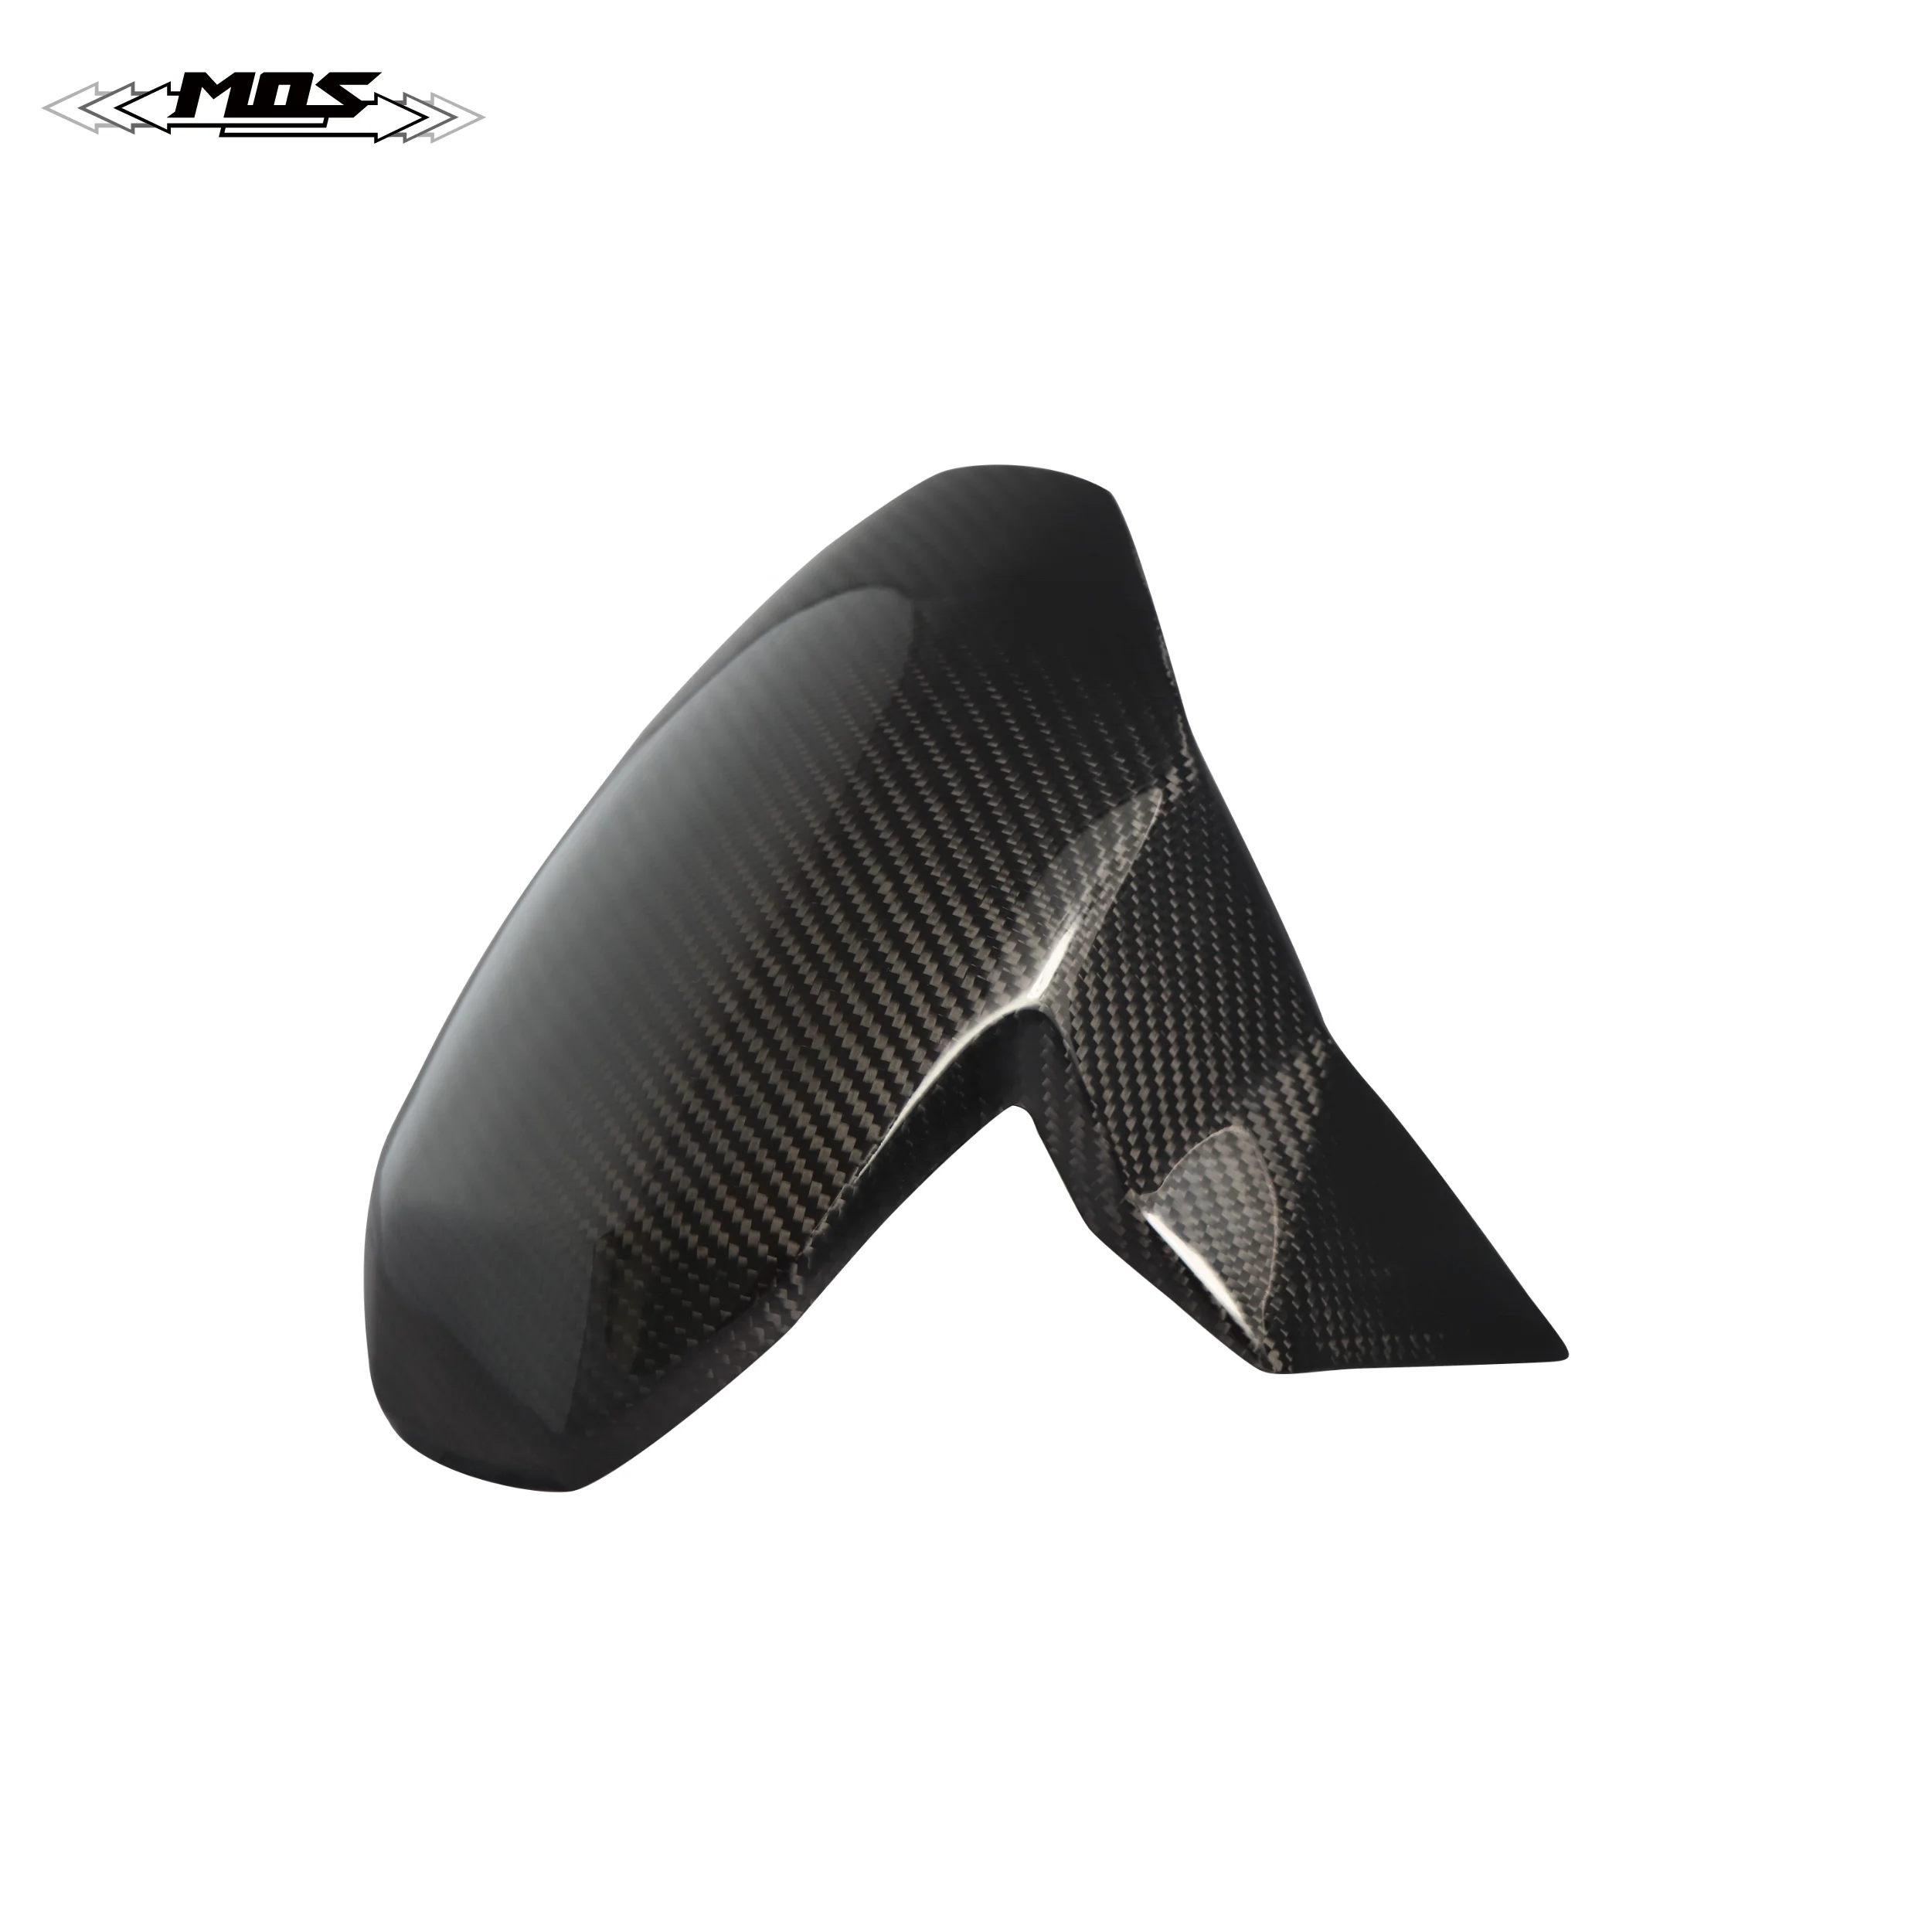 MOS Carbon Fiber Front Fender Cover for Honda Motorcycle X ADV 750 2017 2018 2019 2020 (62020990548)